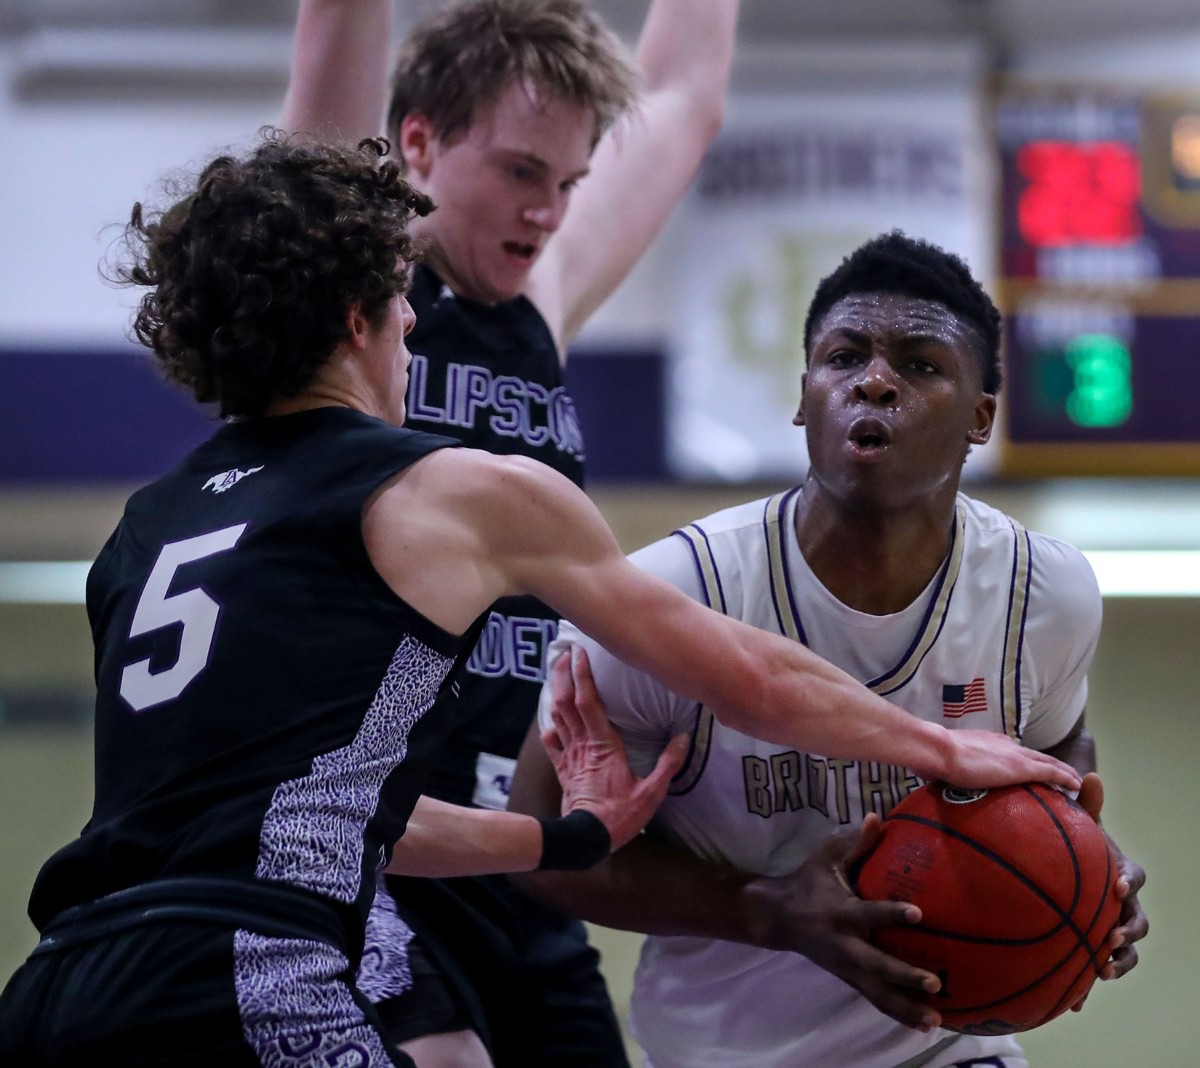 <strong>CBHS guard Chandler Jackson (1) drives to the lane during a Feb. 27, 2021 game against Lipscomb Academy in Memphis.</strong> (Patrick Lantrip/Daily Memphian)